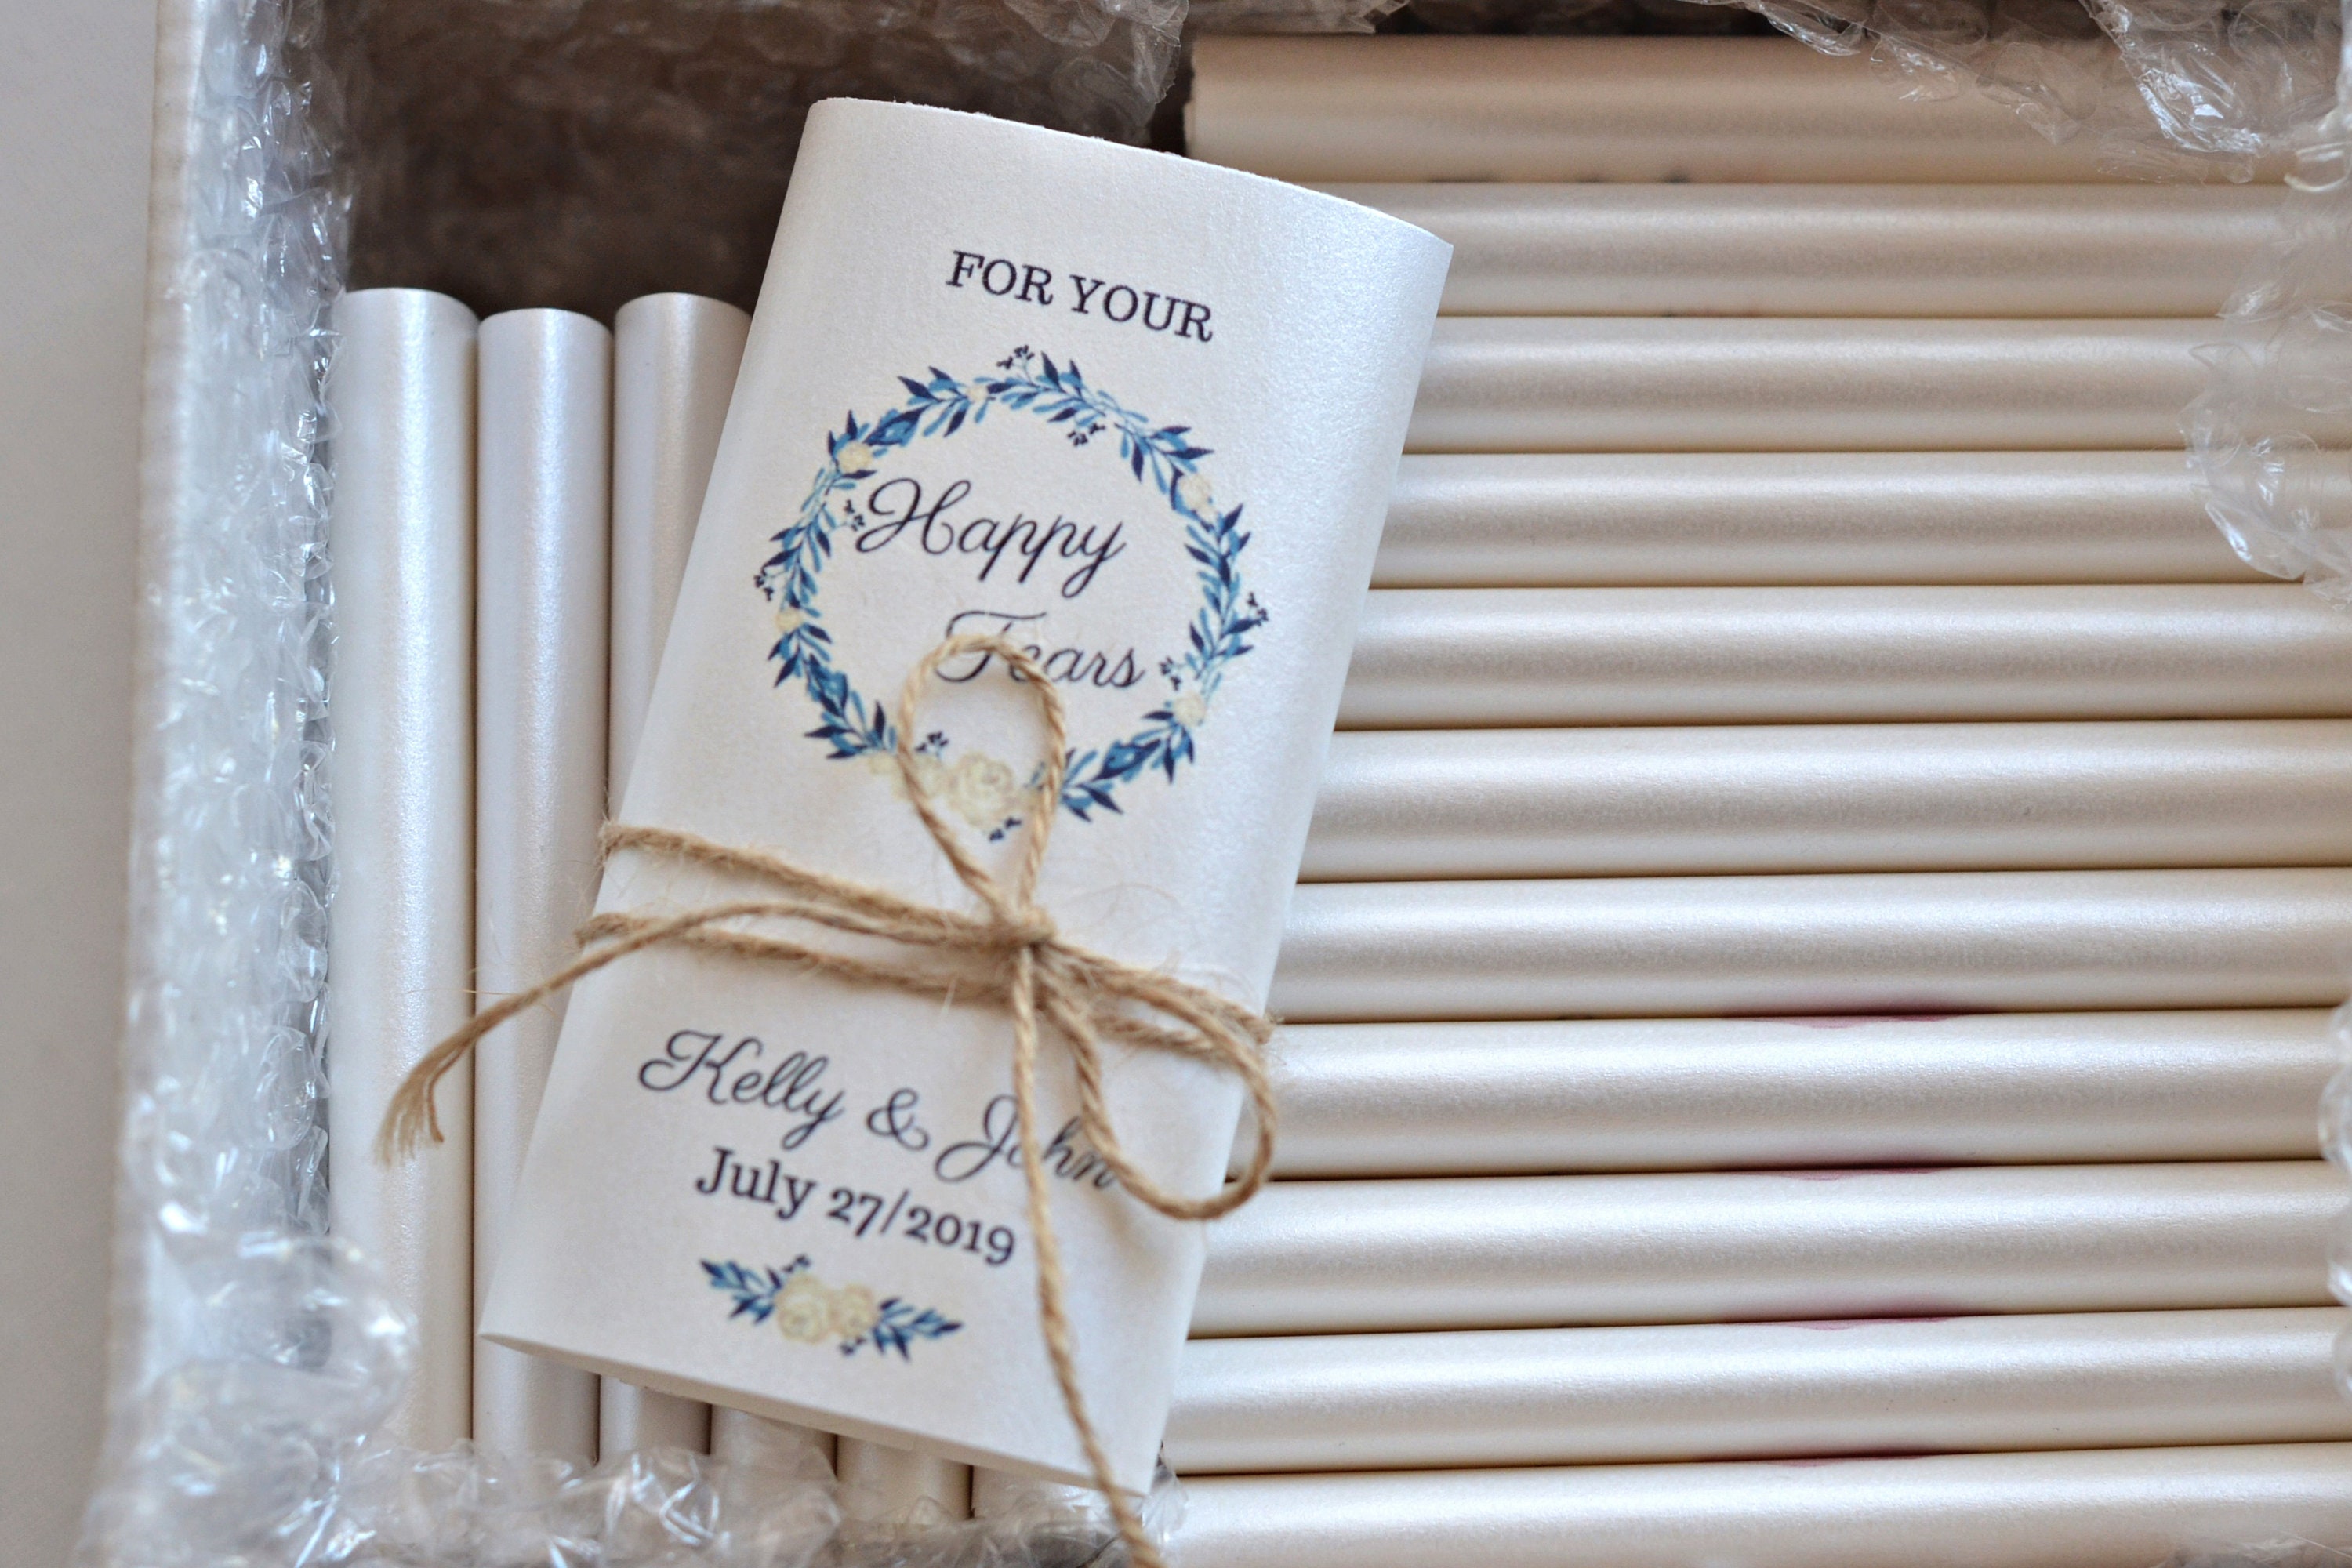  Wedding Tissues Packs For Guests- Set Of 80- For Your Happy  Tears Tissues- Wedding Favors For GuestsFrosted-PaperBulk Individual Tissue  Packs & Items For Wedding Welcome Bags By